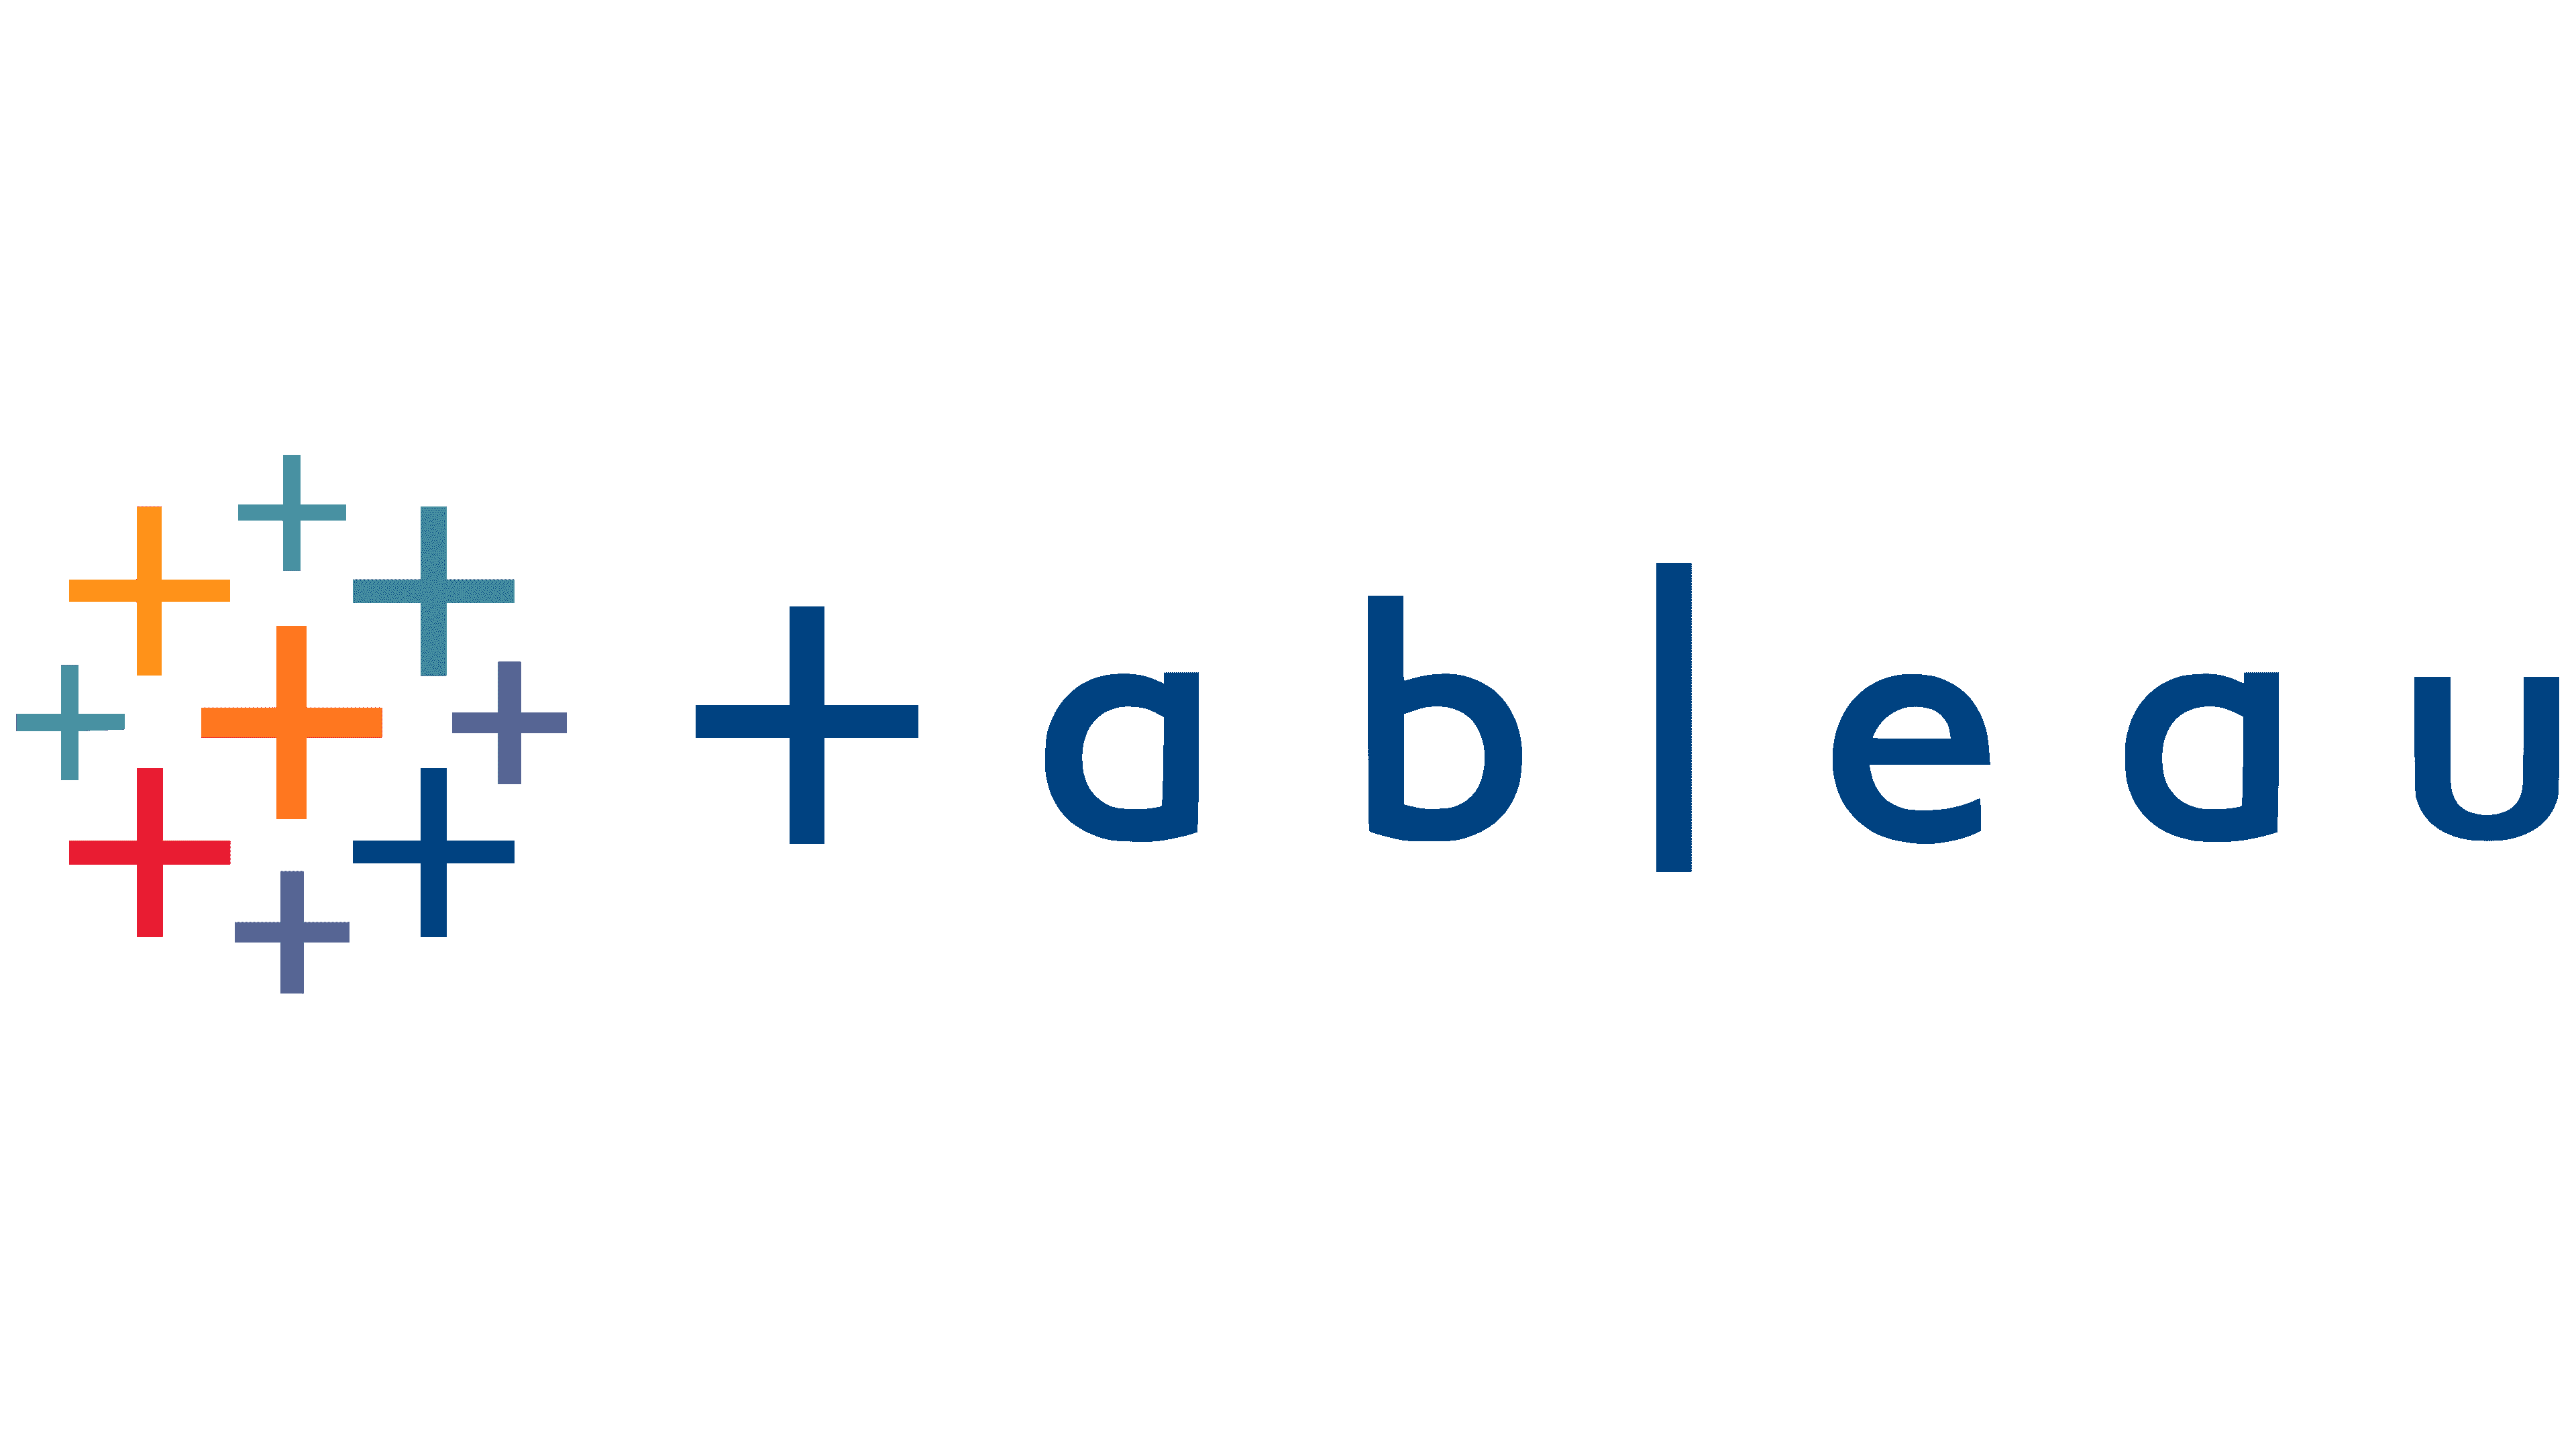 tableau course in chennai, data science course in chennai, data anlaytics course in chennai